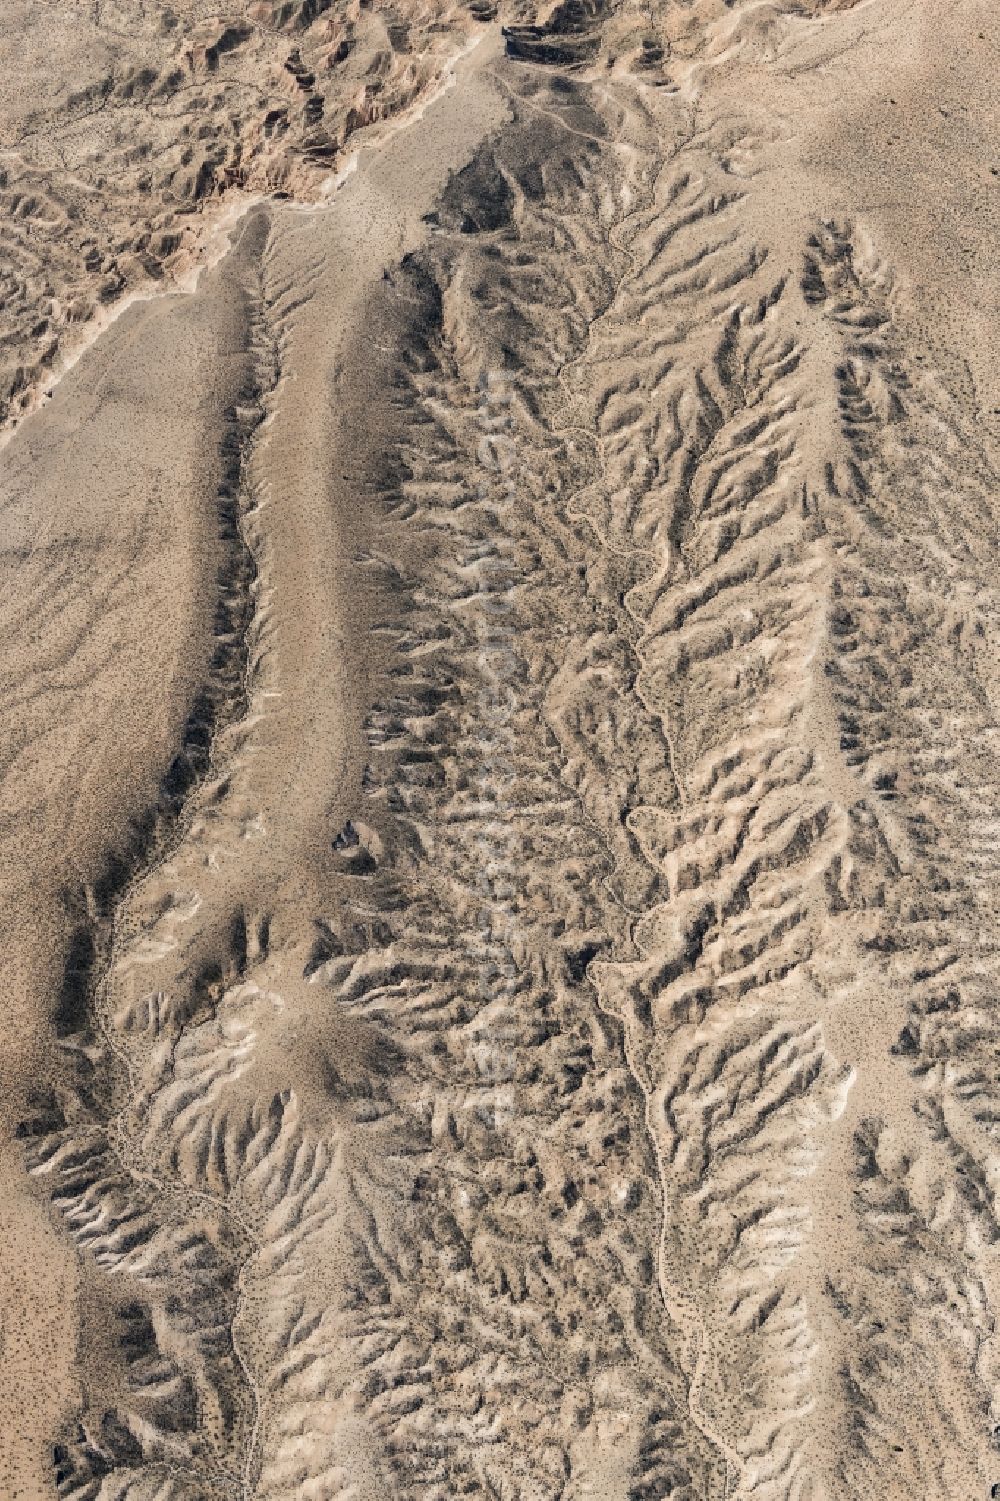 Littlefield from the bird's eye view: Landscape of the dry desert deformed by soil erosion and traces of water in Littlefield in Arizona, United States of America